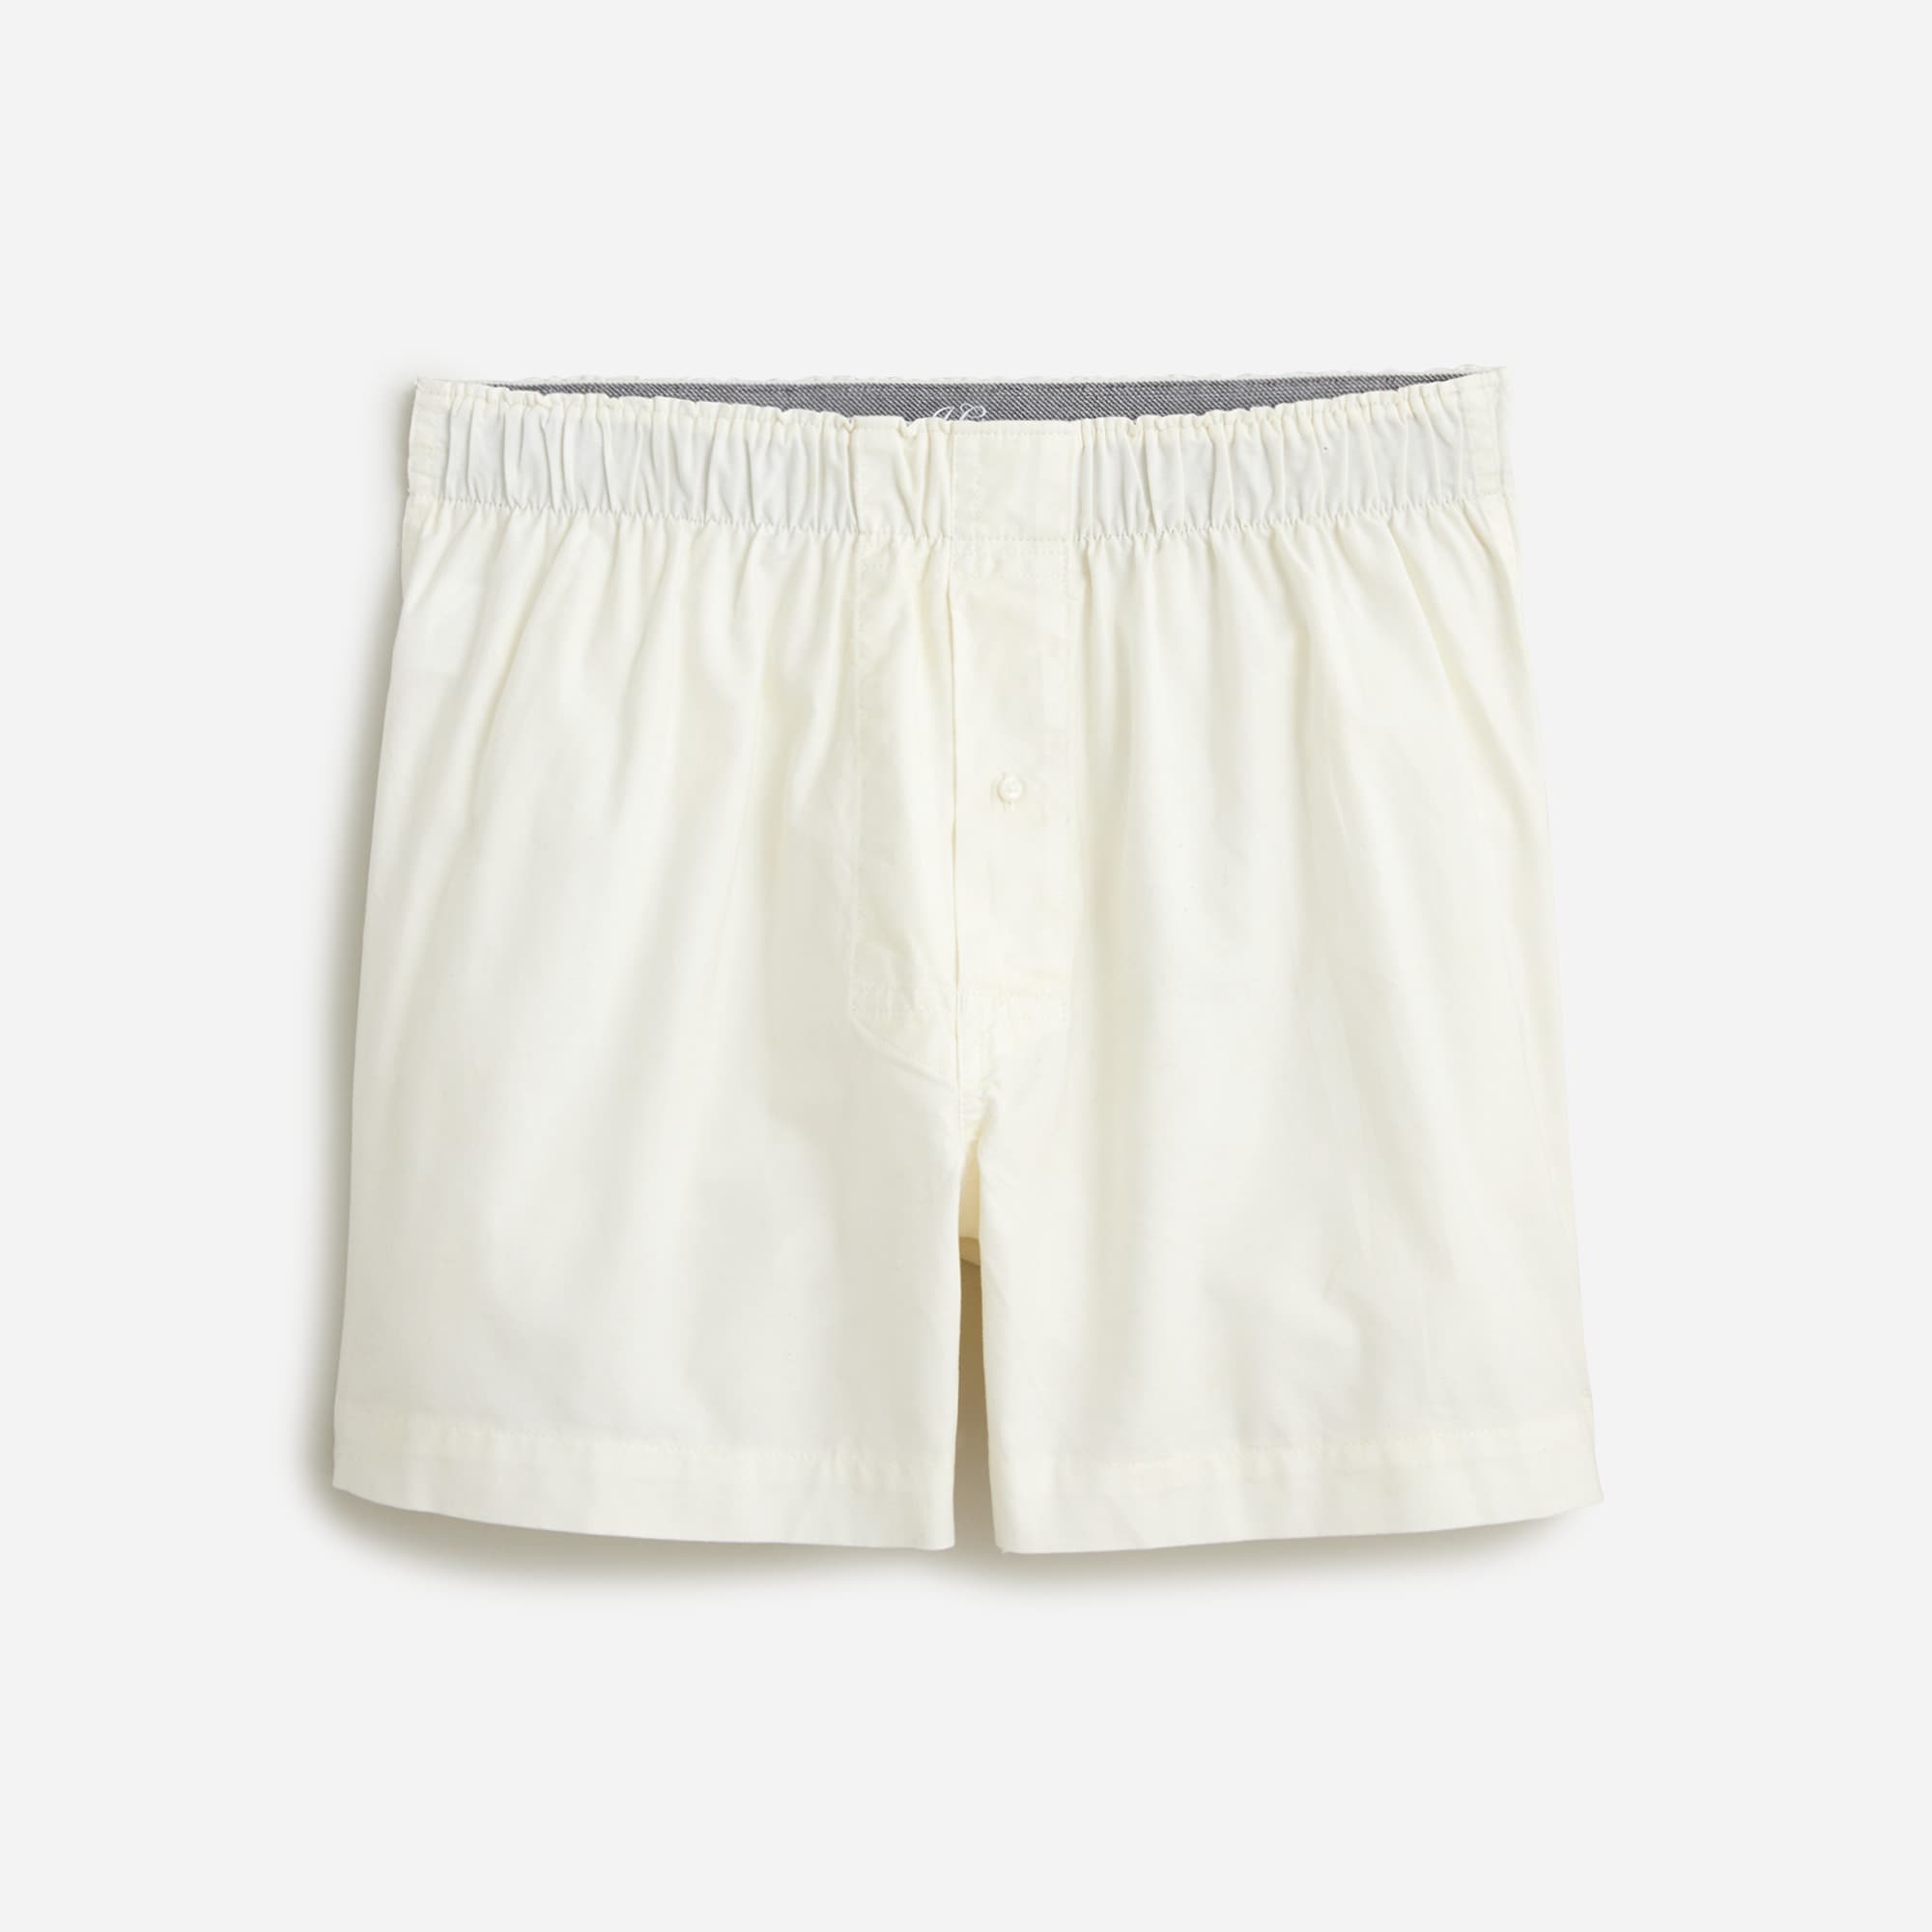 mens Boxer shorts in garment-dyed Broken-in organic cotton oxford